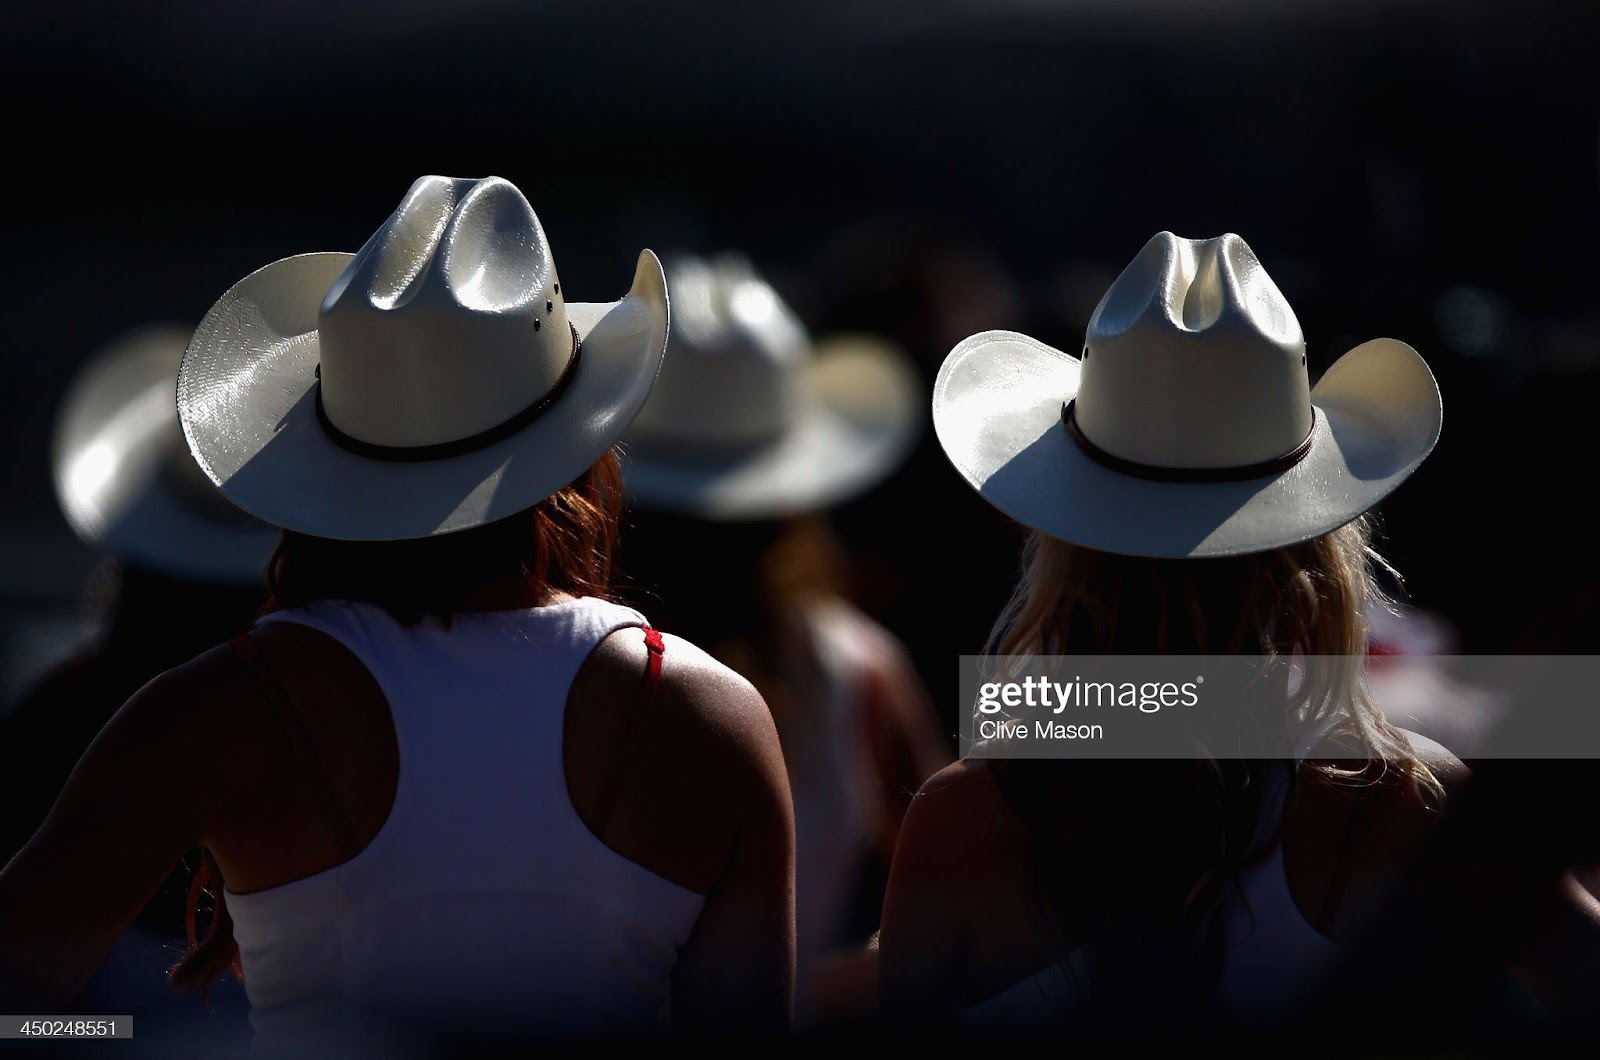 D:\Documenti\posts\posts\Women and motorsport\foto\Getty e altre\grid-girls-are-seen-at-the-drivers-parade-before-the-united-states-picture-id450248551.jpg